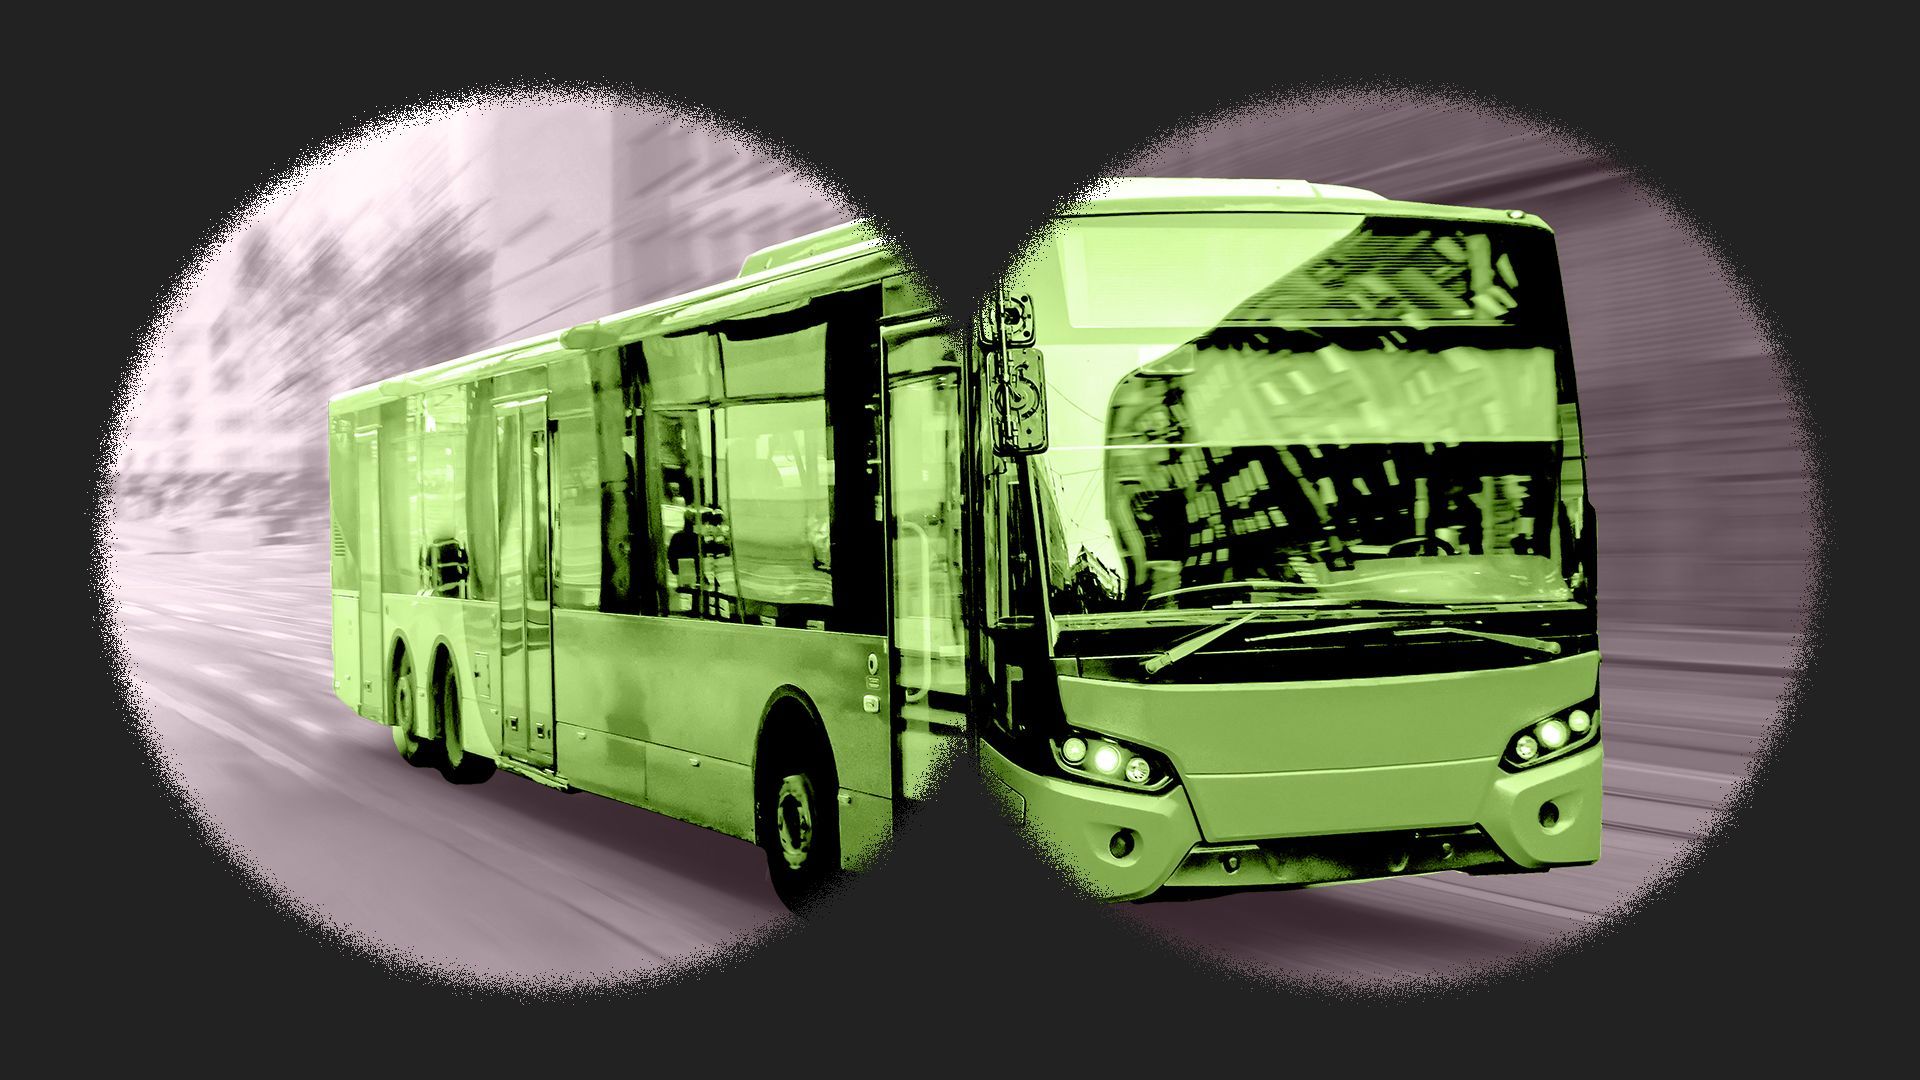 Illustration of a bus seen through the view of binoculars.